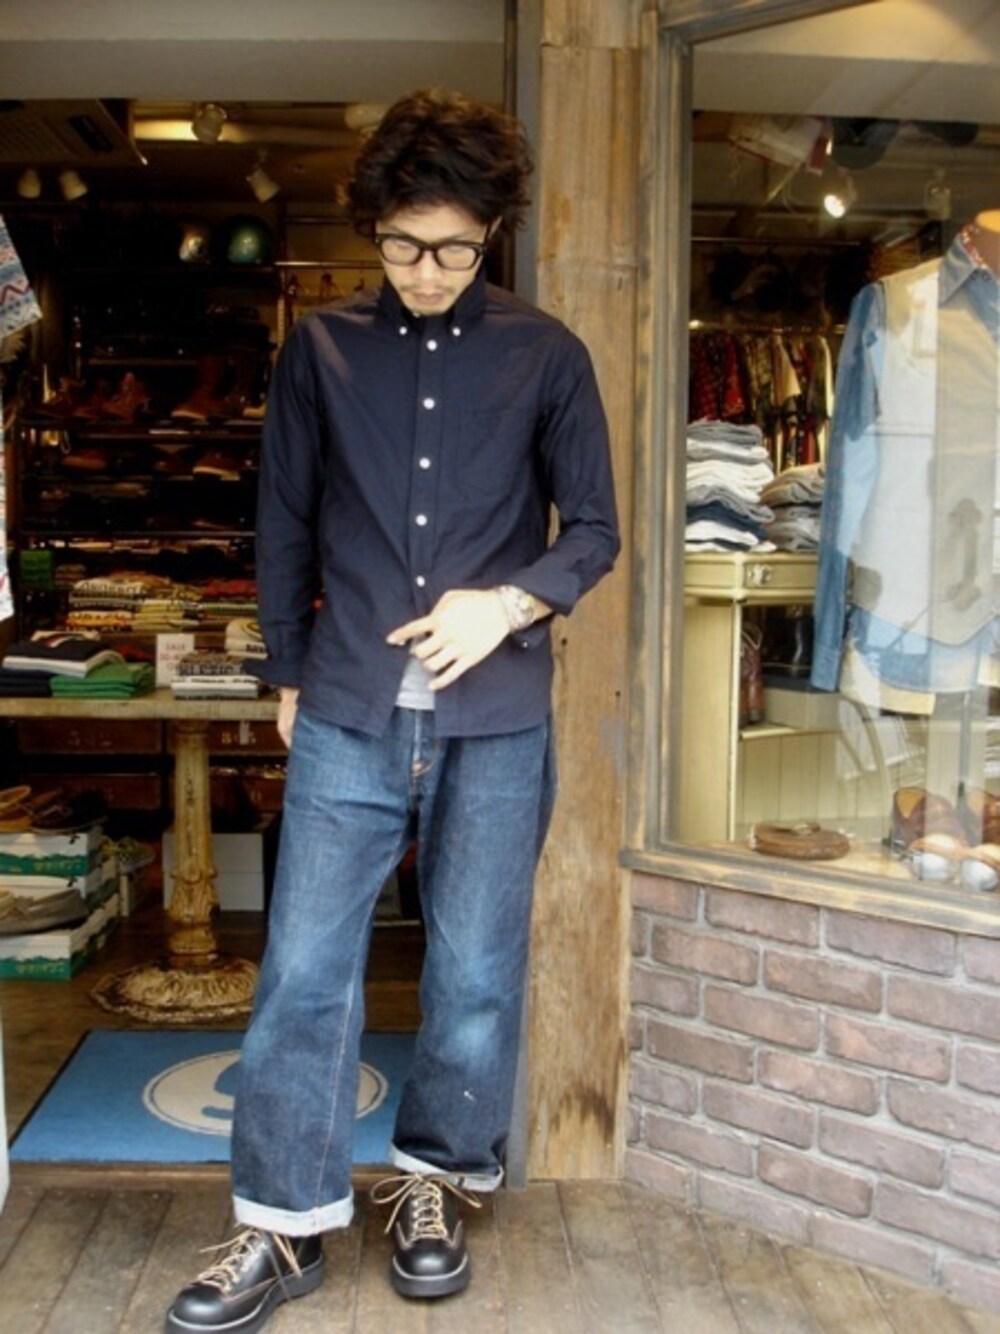 KenjiHimenoさんの「KEATON CHASE
Model: L/S TRIPLE NEEDLE B.D SHIRTS-OXFORD
Color: NAVY
Size: S, M, L
Fabric: Cotton 100%
Price: ￥12.000+tax
Made in JAPAN（KEATON CHASE）」を使ったコーディネート